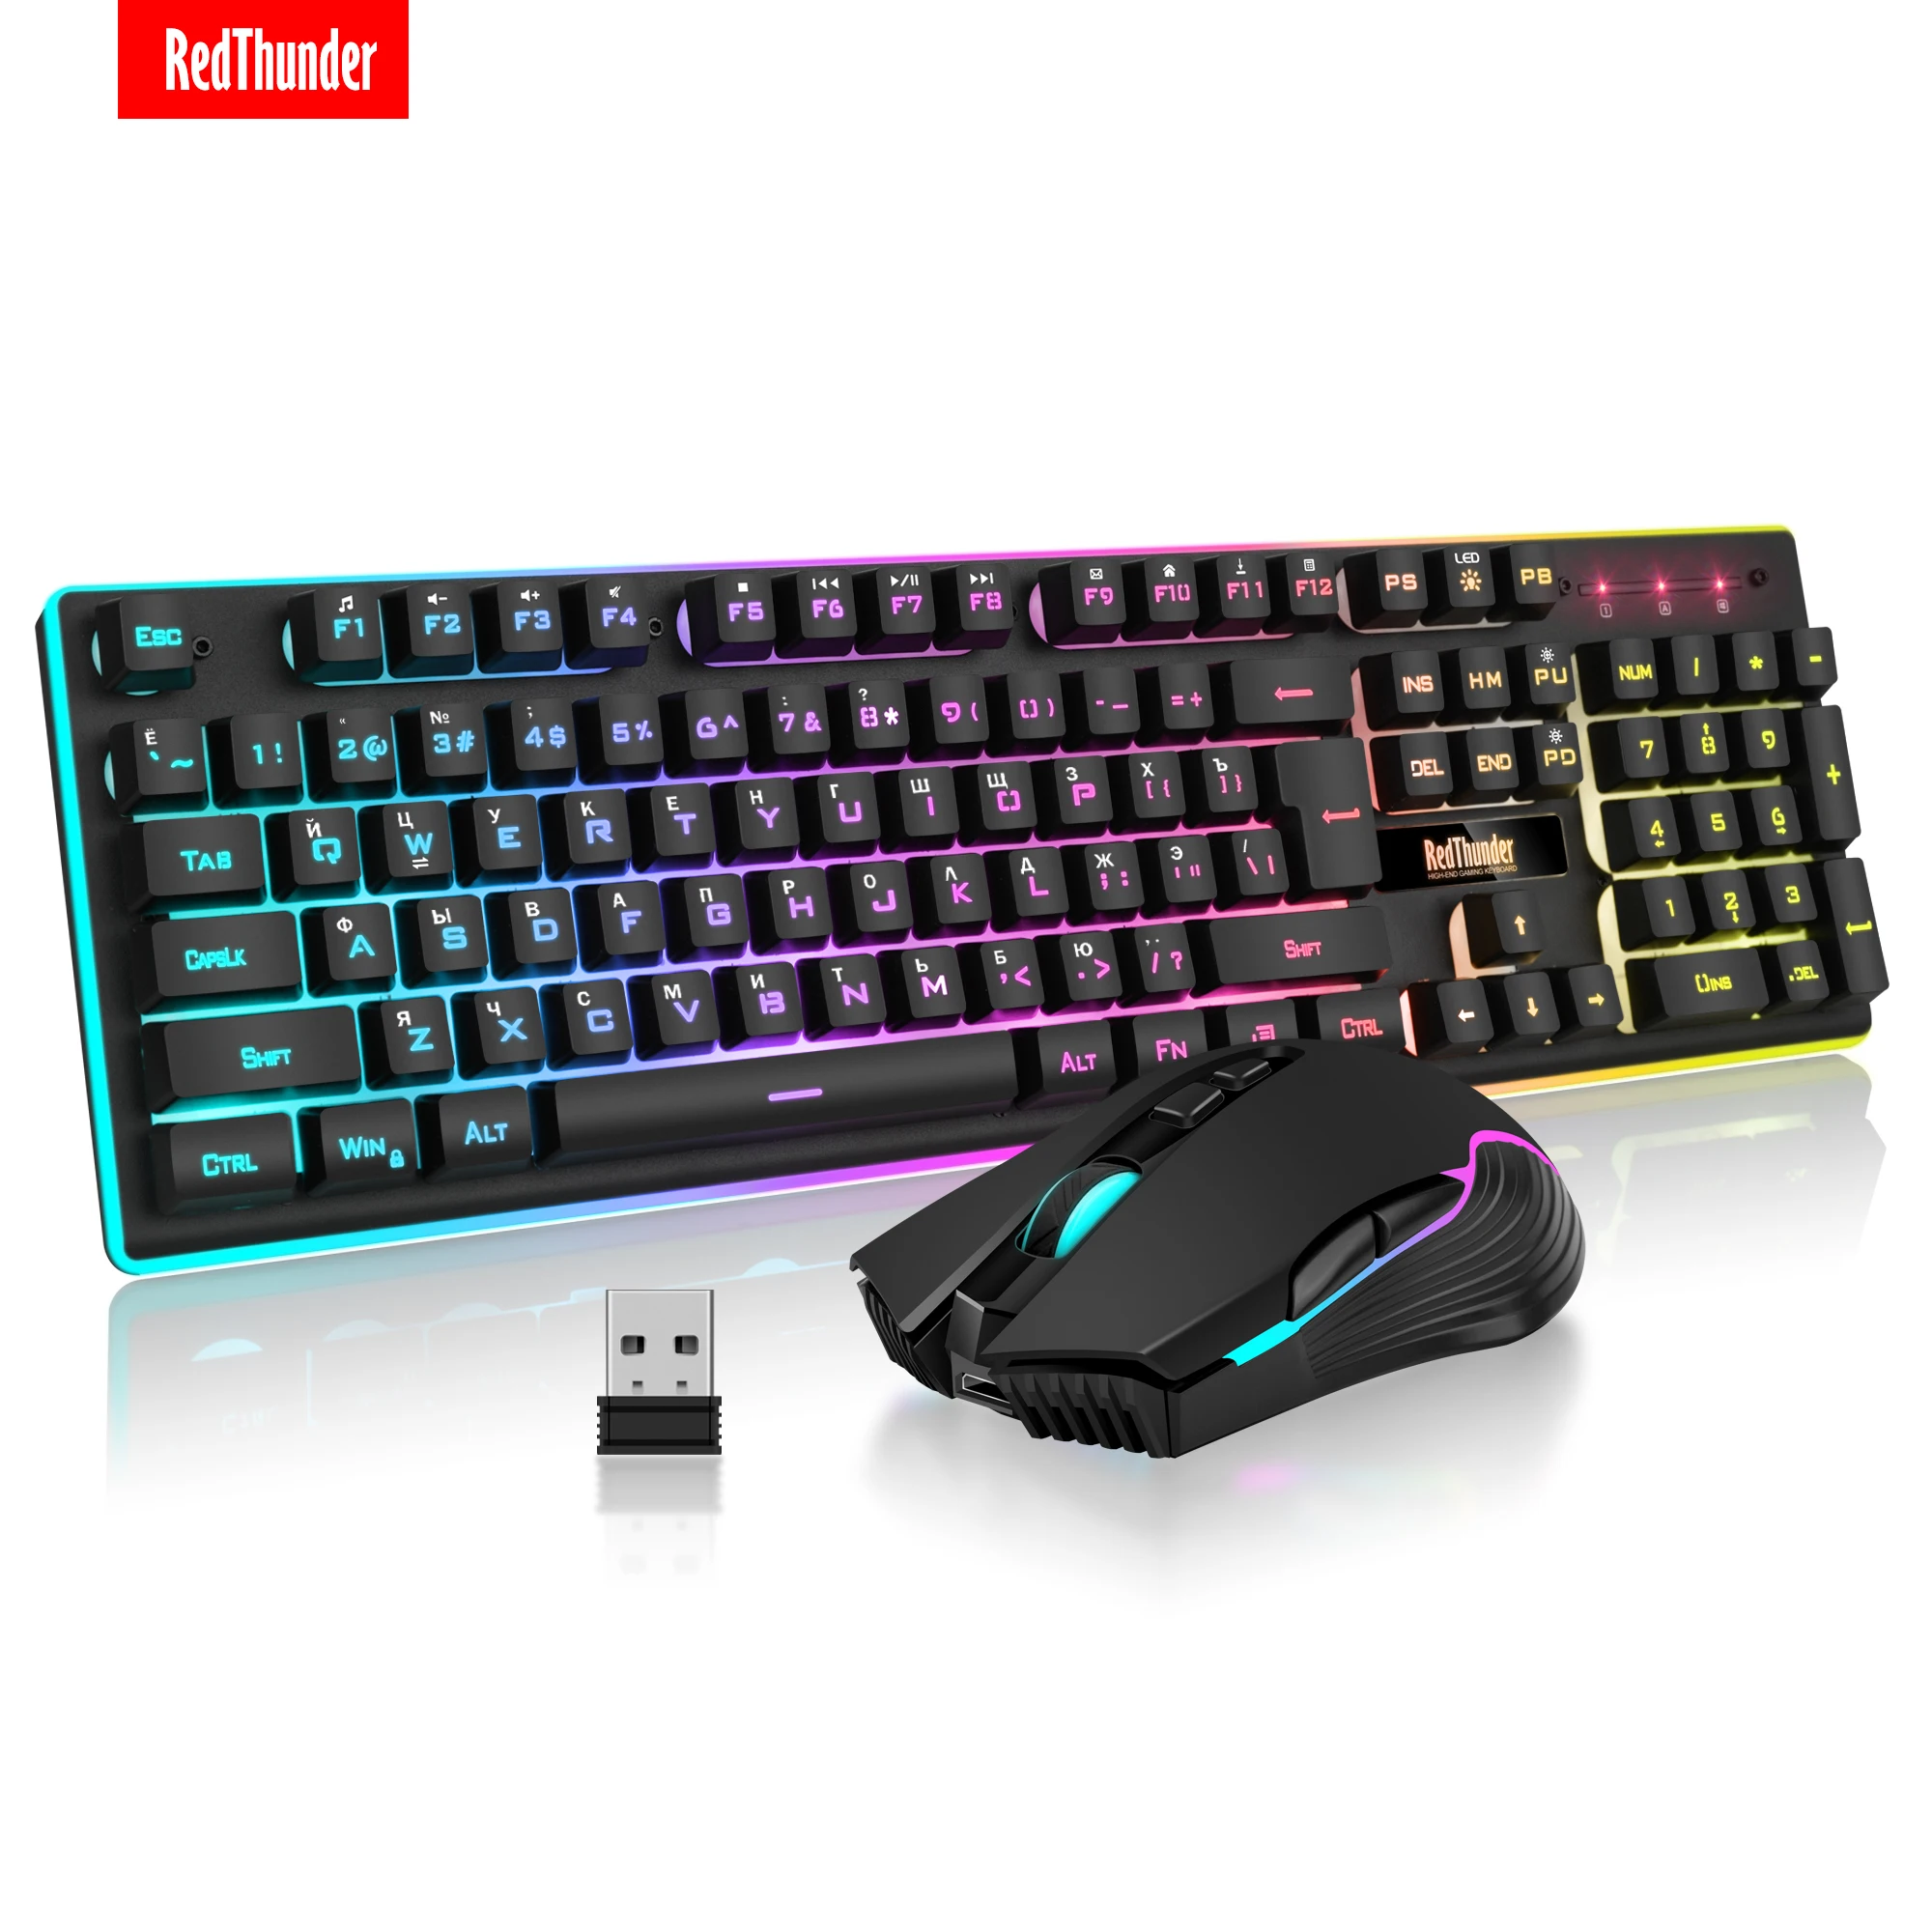 RedThunder K10 Wireless Gaming Keyboard and Mouse Combo, LED Backlit Rechargeable 3800mAh Battery, Mechanical Feel Anti-ghosting